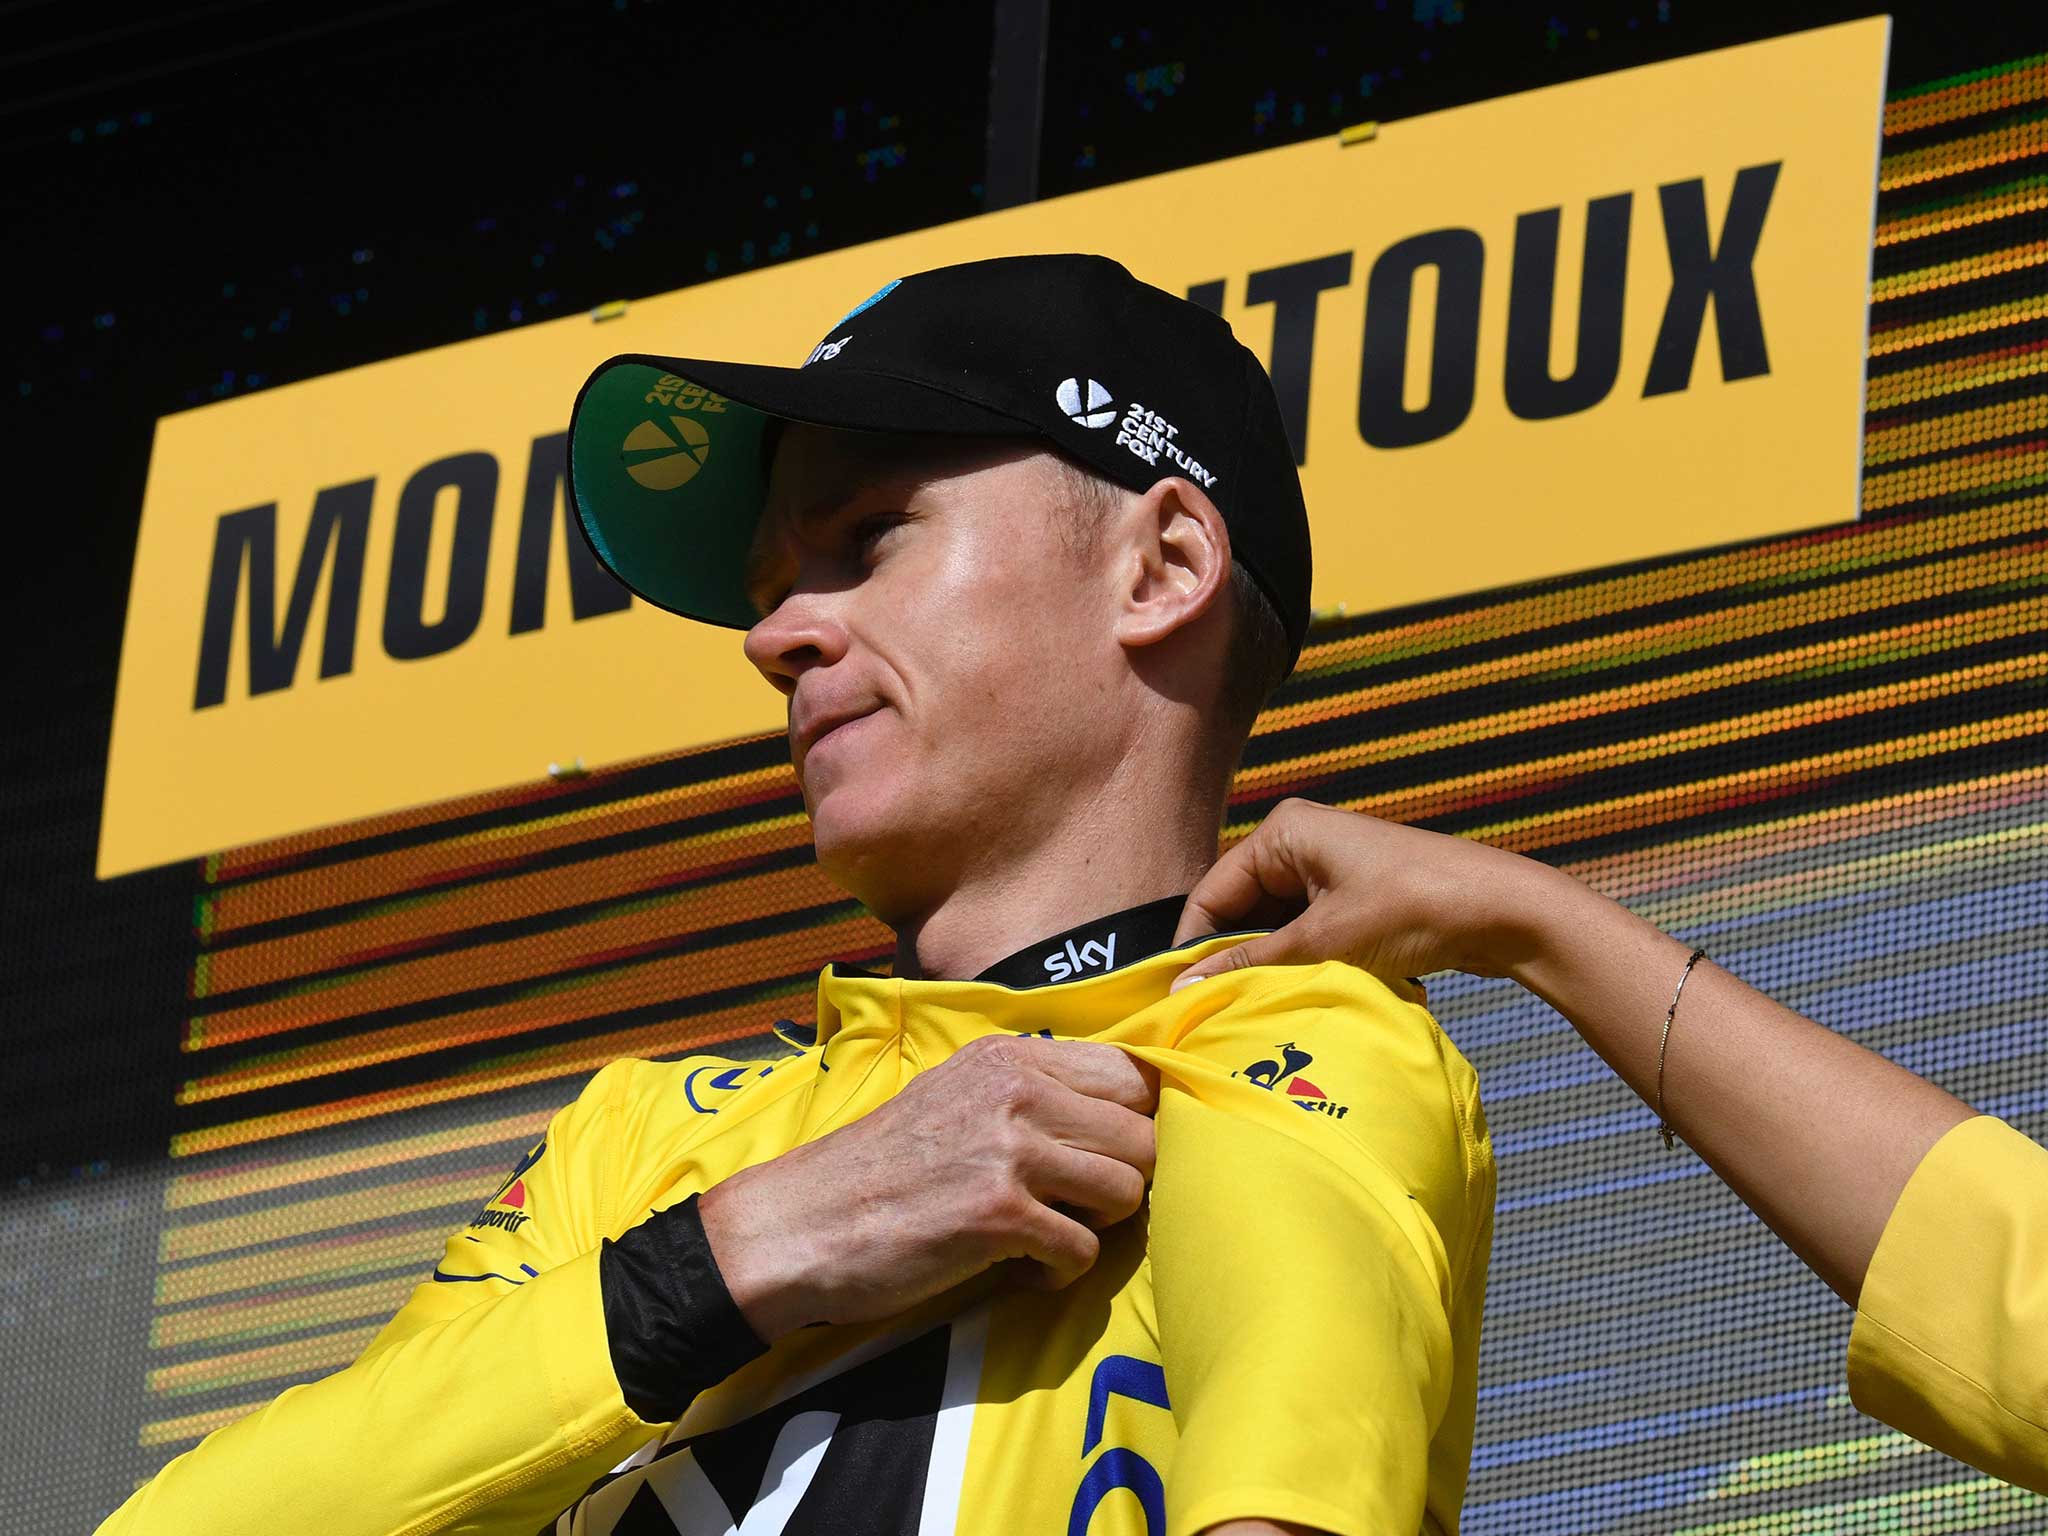 Chris Froome retains the yellow jersey despite odd circumstances